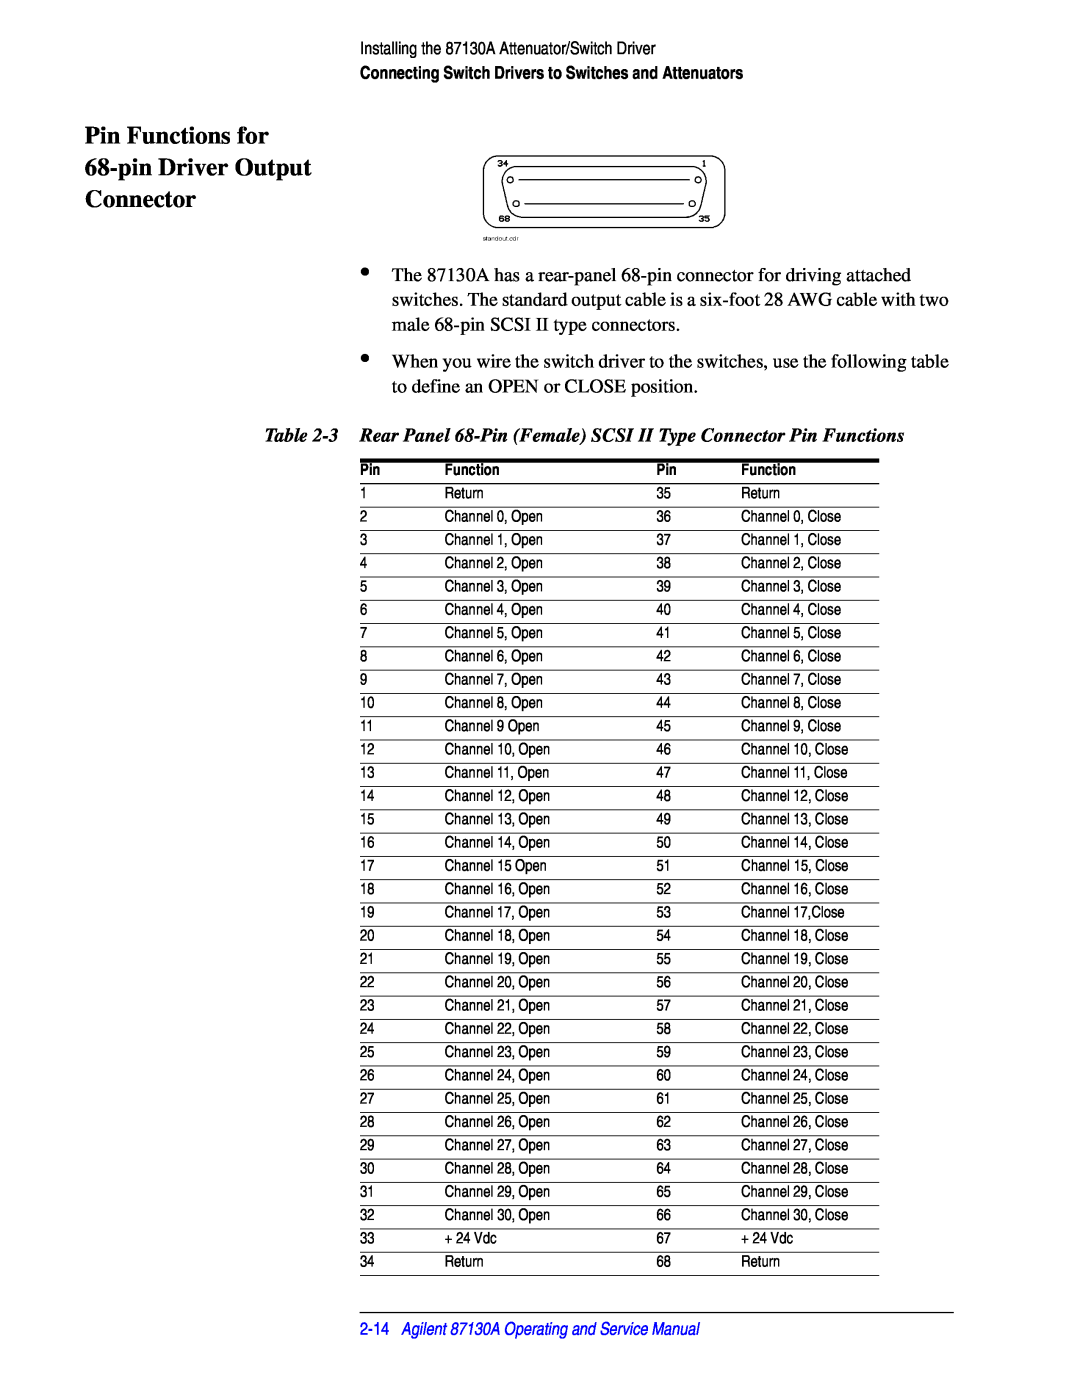 Agilent Technologies Pin Functions for 68-pin Driver Output Connector, Agilent 87130A Operating and Service Manual 